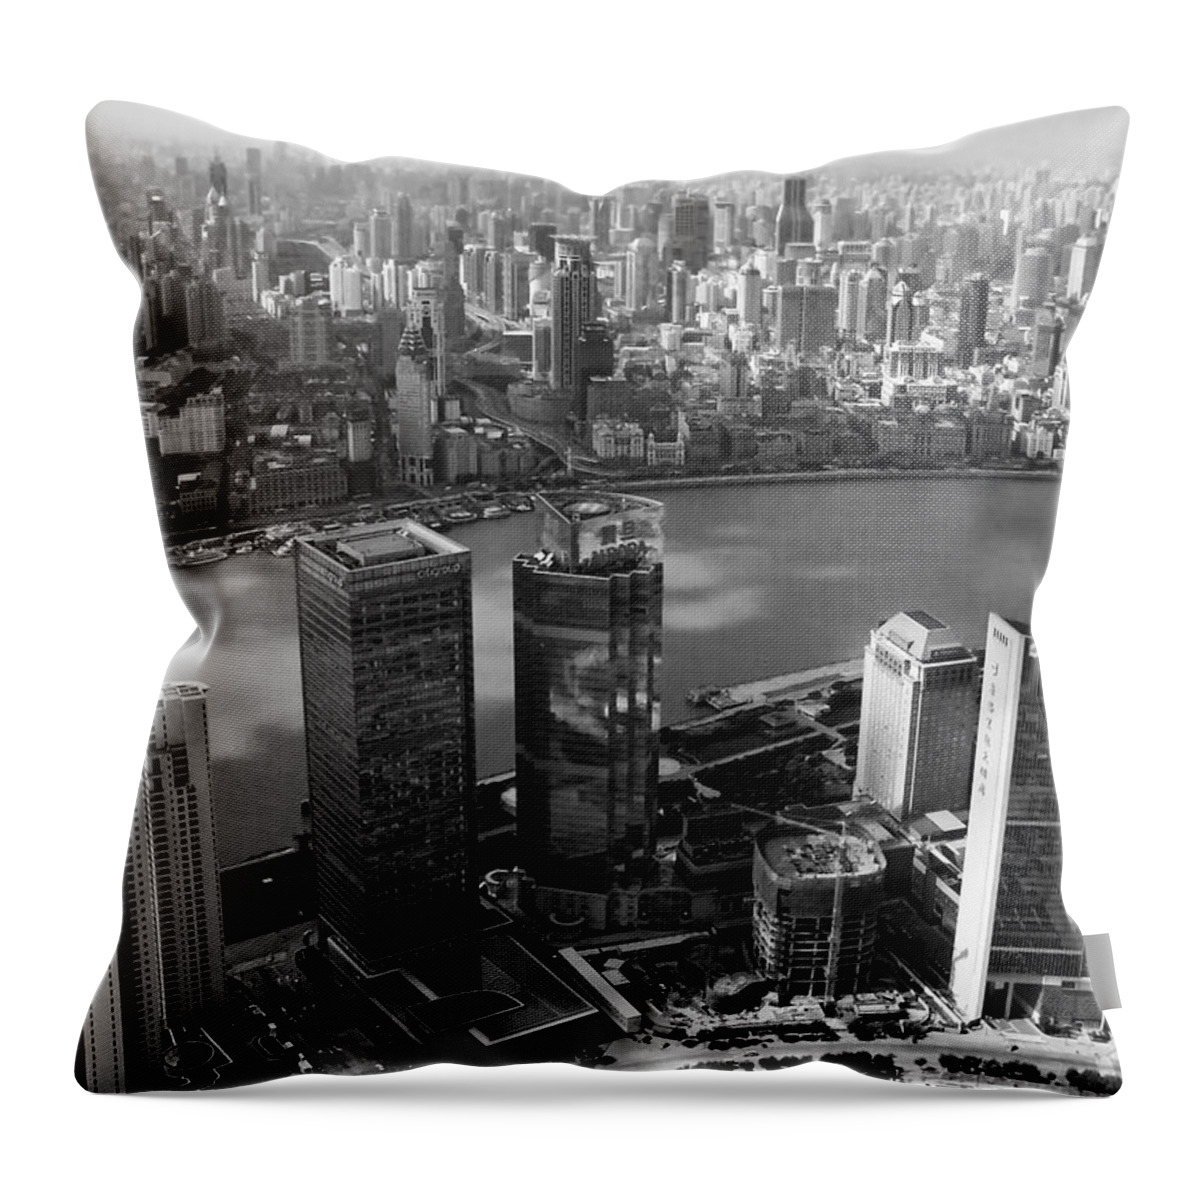 China Throw Pillow featuring the photograph Shanghai In Black And White by Debbie Oppermann